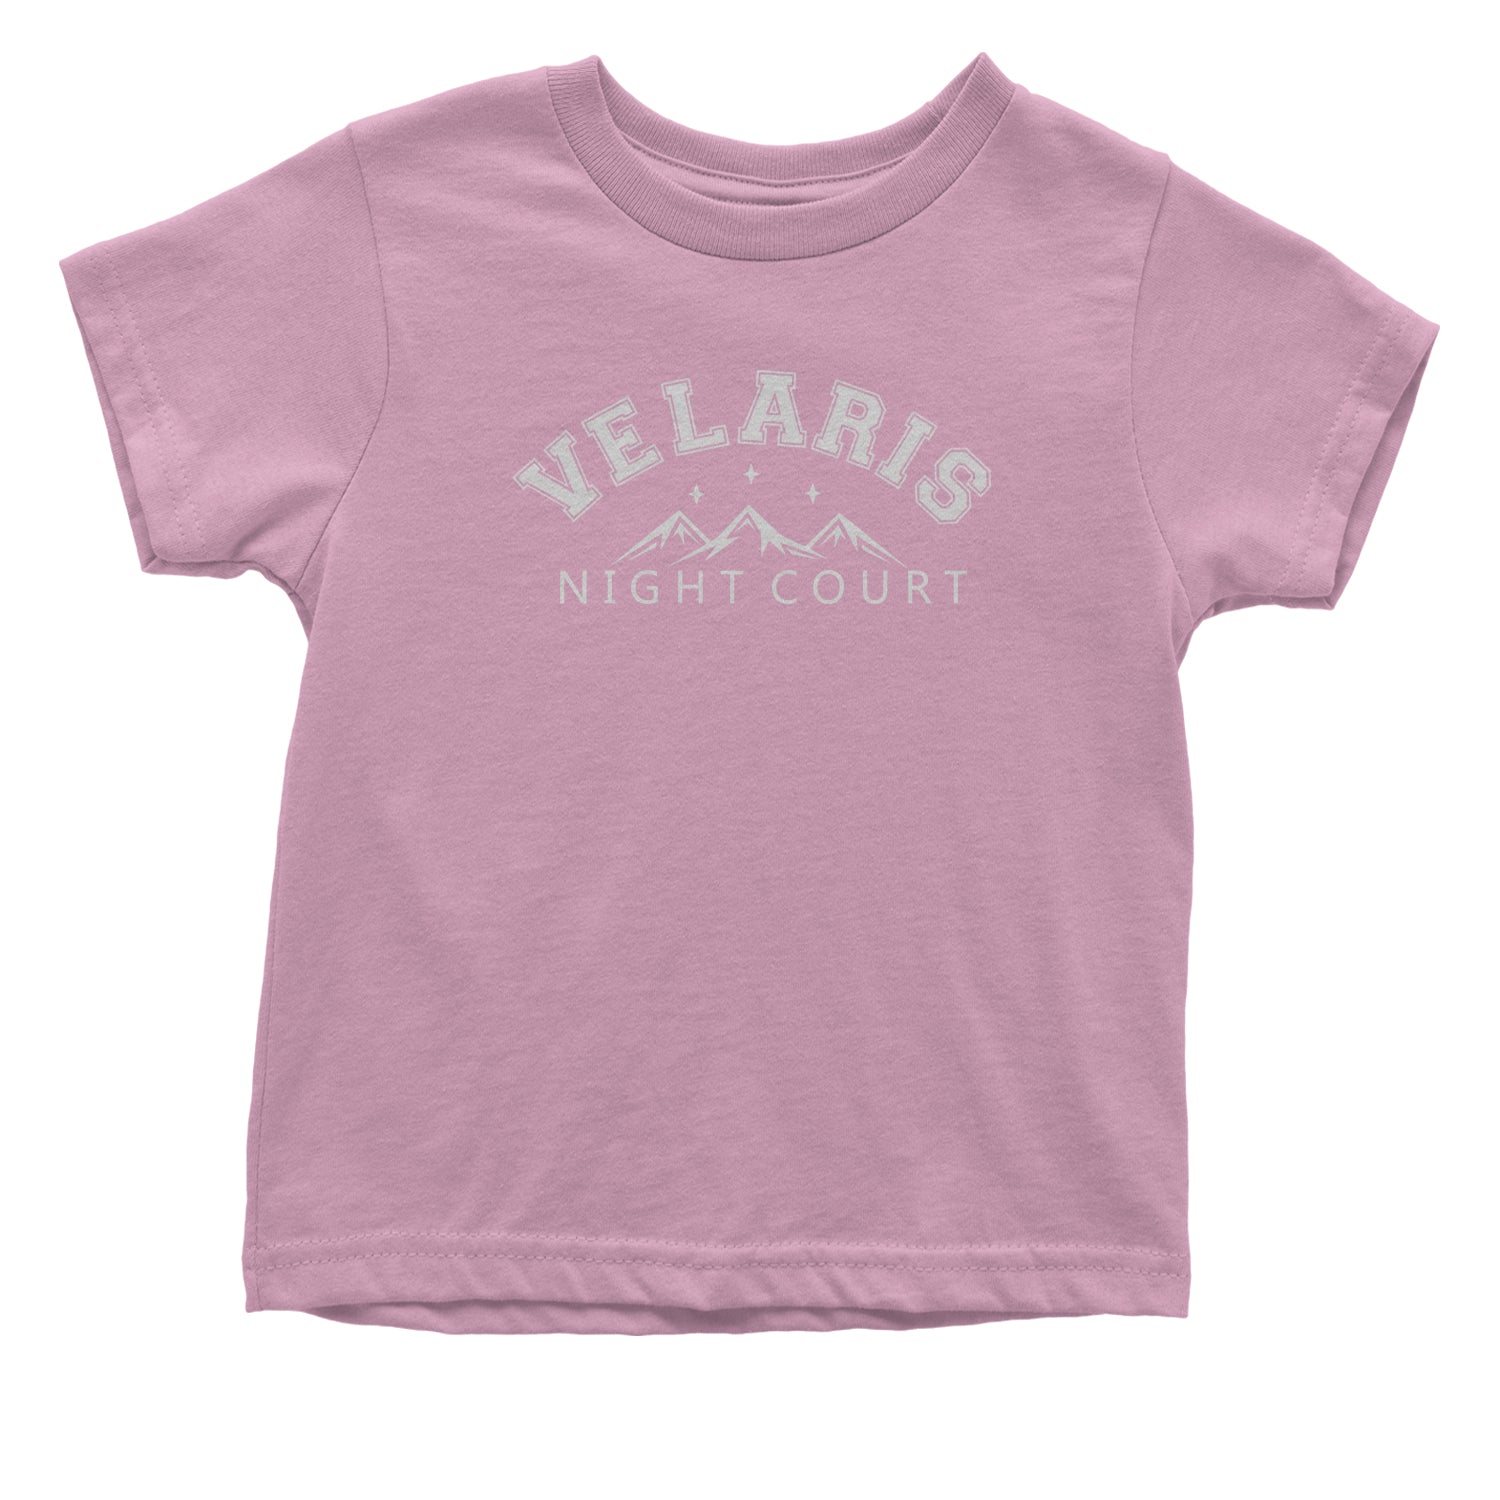 Velaris Night Court Squad Infant One-Piece Romper Bodysuit and Toddler T-shirt acotar, court, illyrian, maas, of, thorns by Expression Tees